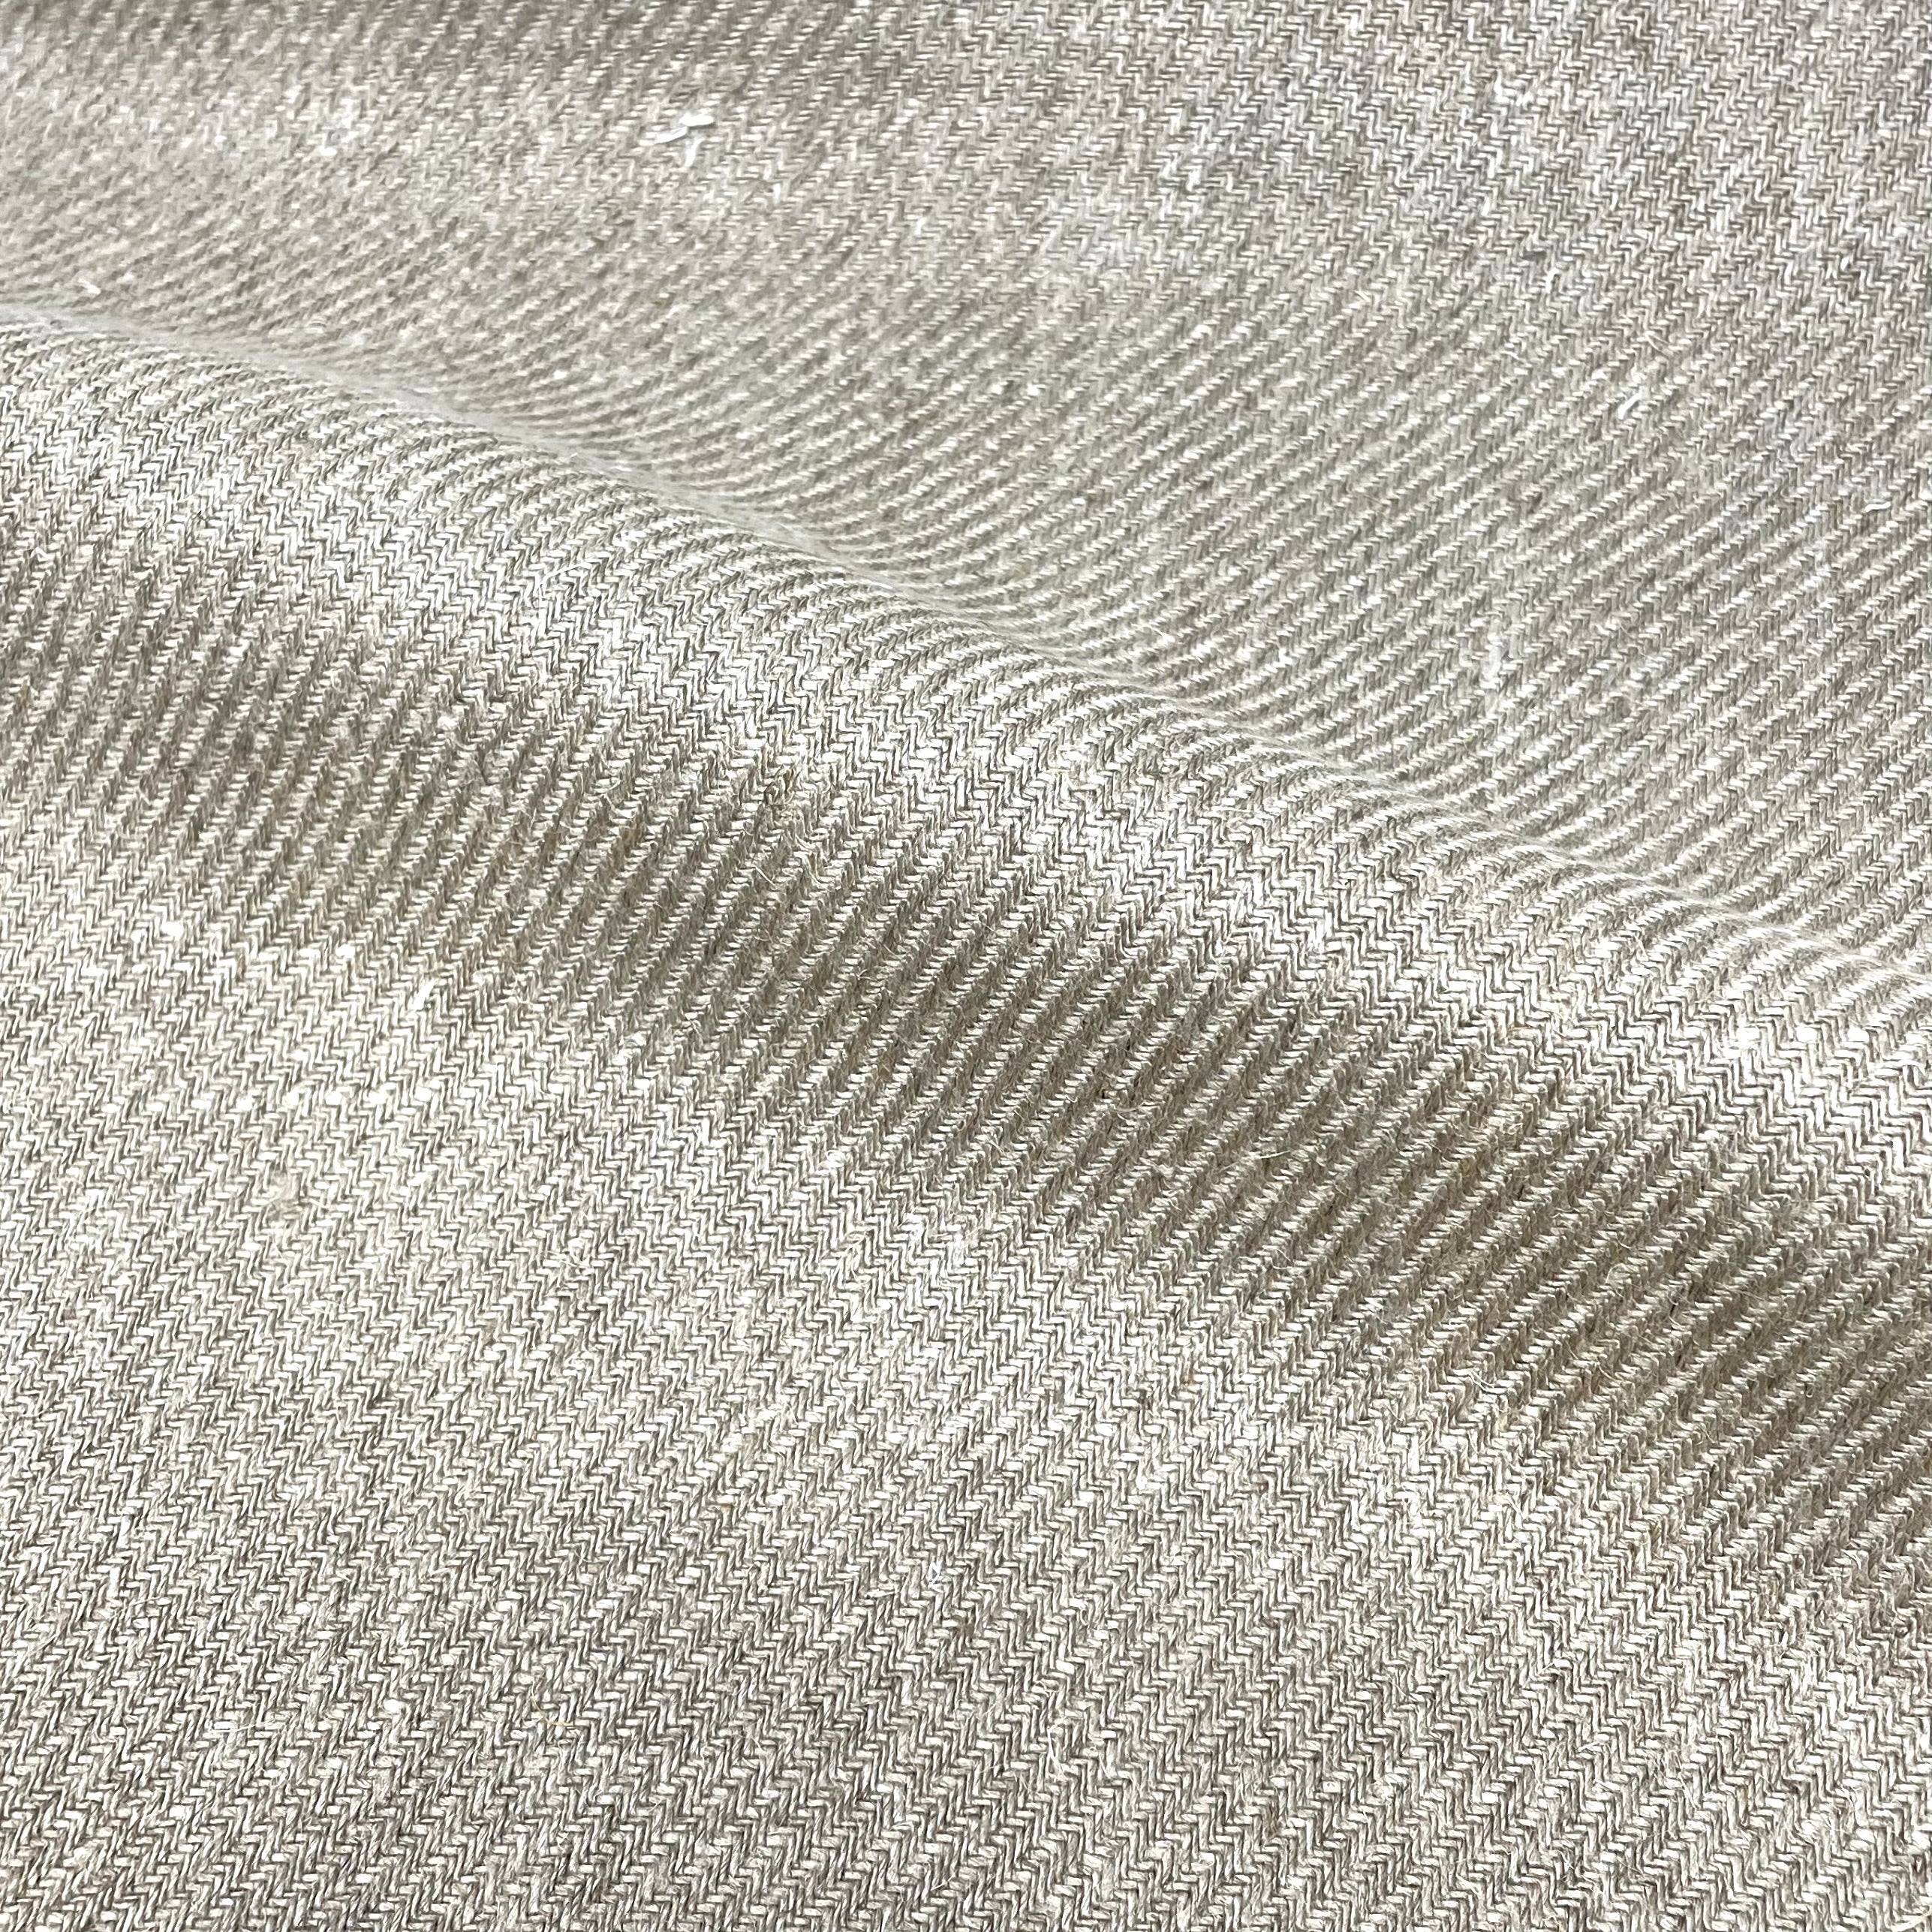 Diagonal 100% Natural Linen Fabric By The Yard, Curtain, Drapery, Table Top, 54" Width/CL1074